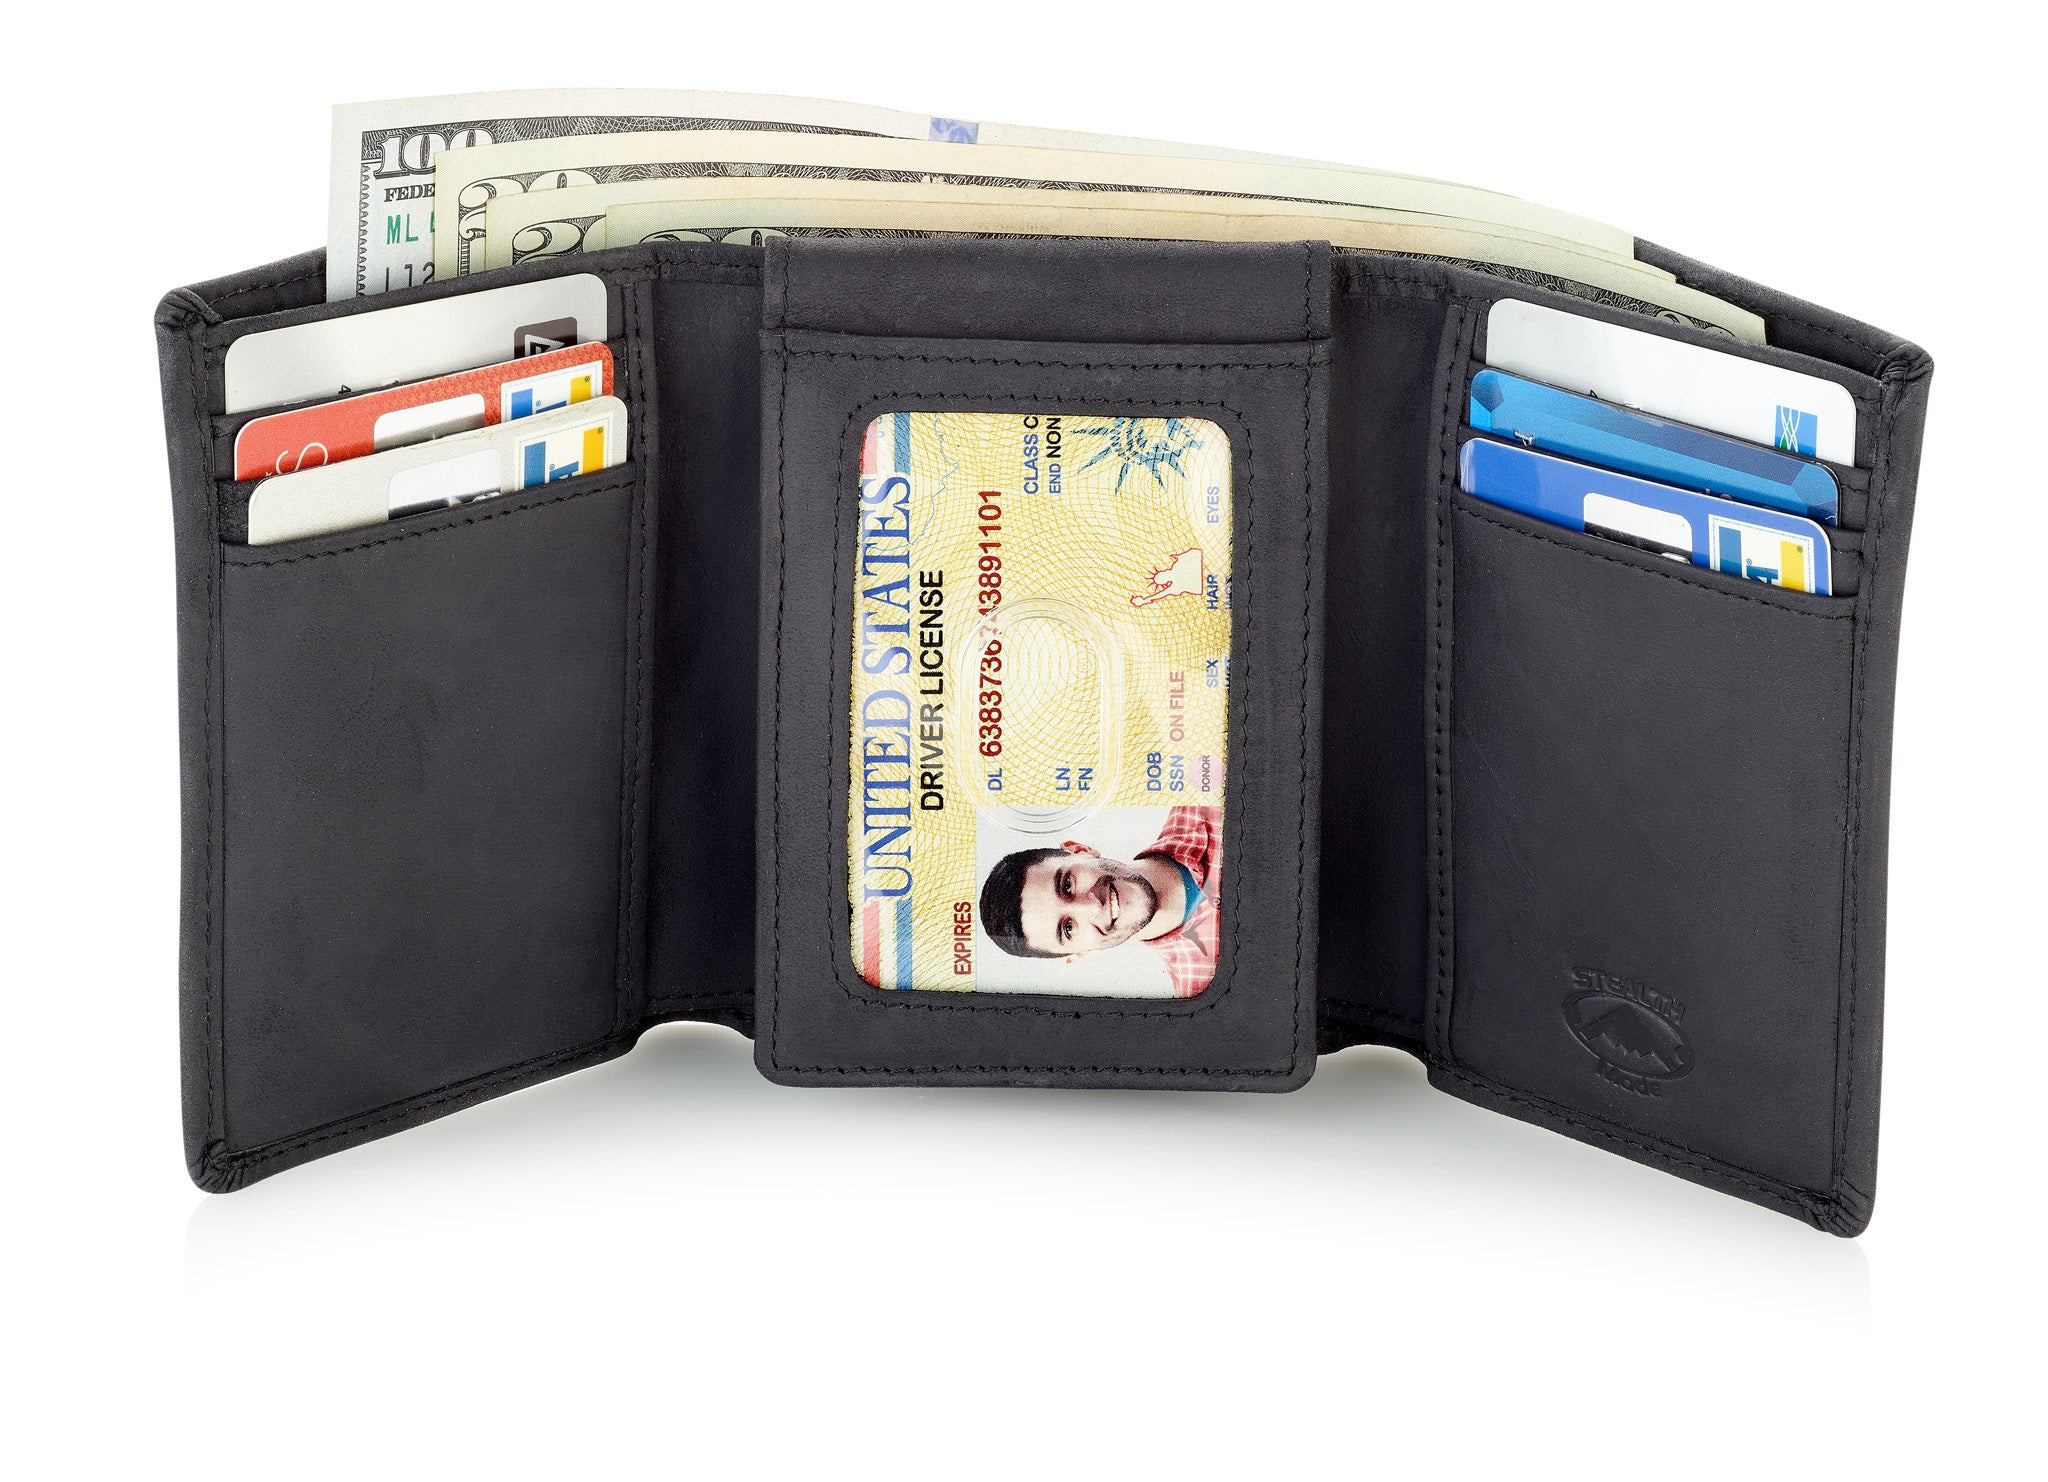 Trifold Leather Wallet for Men with ID Holder and RFID Blocking (Black)